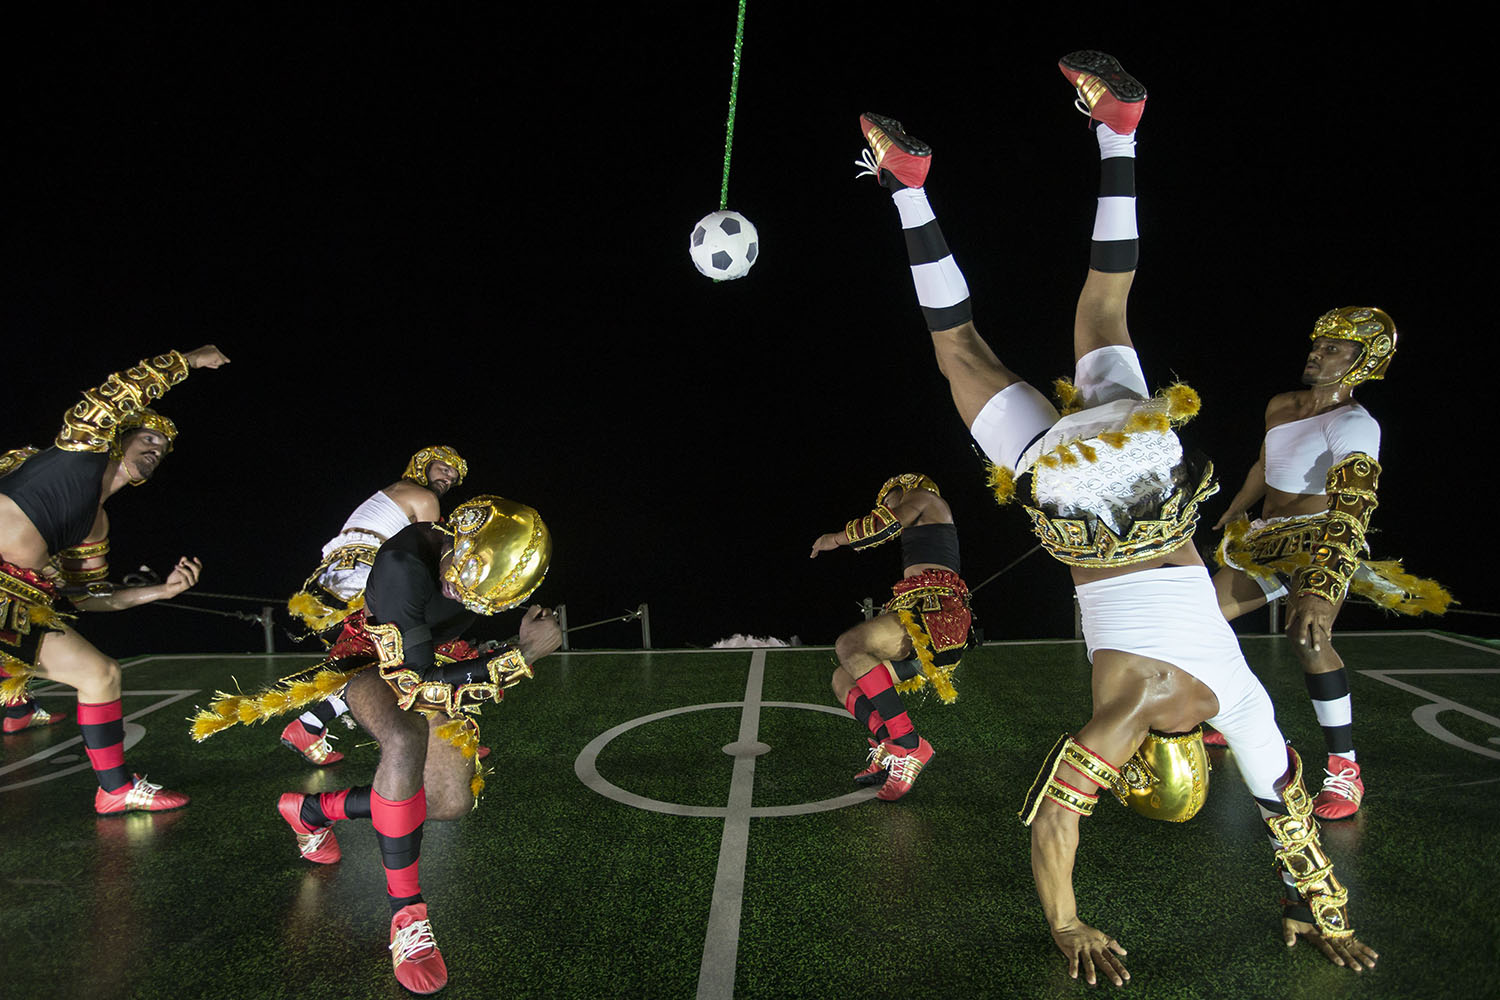 Mar. 4, 2014. Performers from the Imperatriz Leopoldinense samba school pretend to play soccer as they hang on the wall of a float during carnival celebrations at the Sambadrome in Rio de Janeiro.